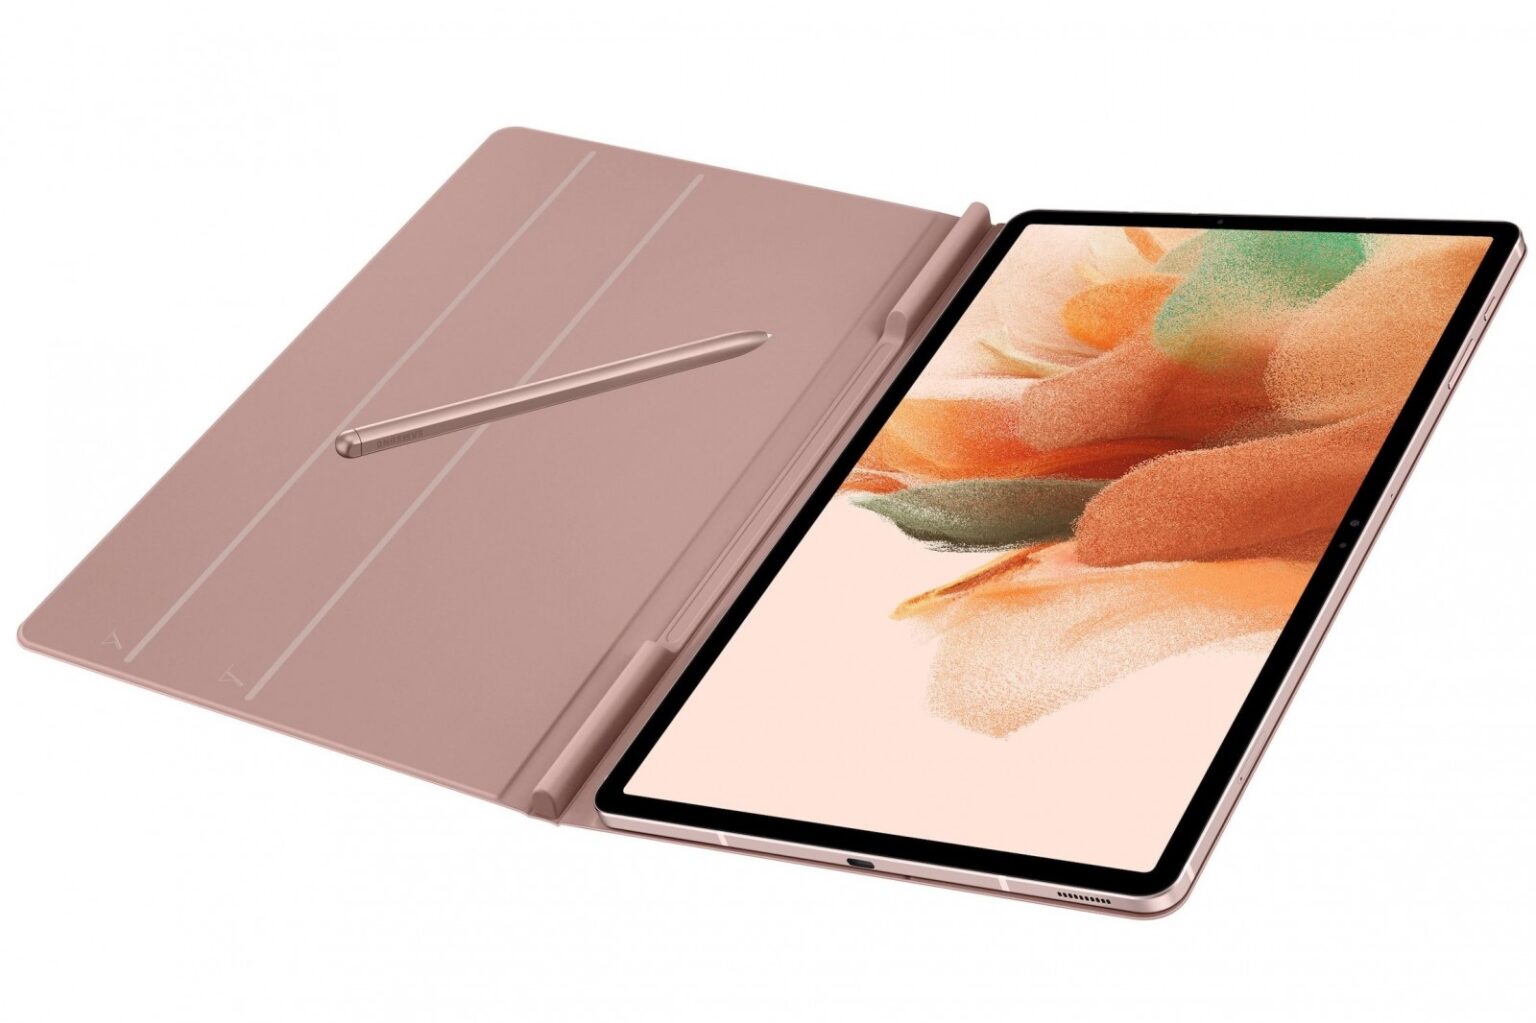 Samsung Galaxy Tab S7 FE (WiFi) Price in Pakistan - Specifications What